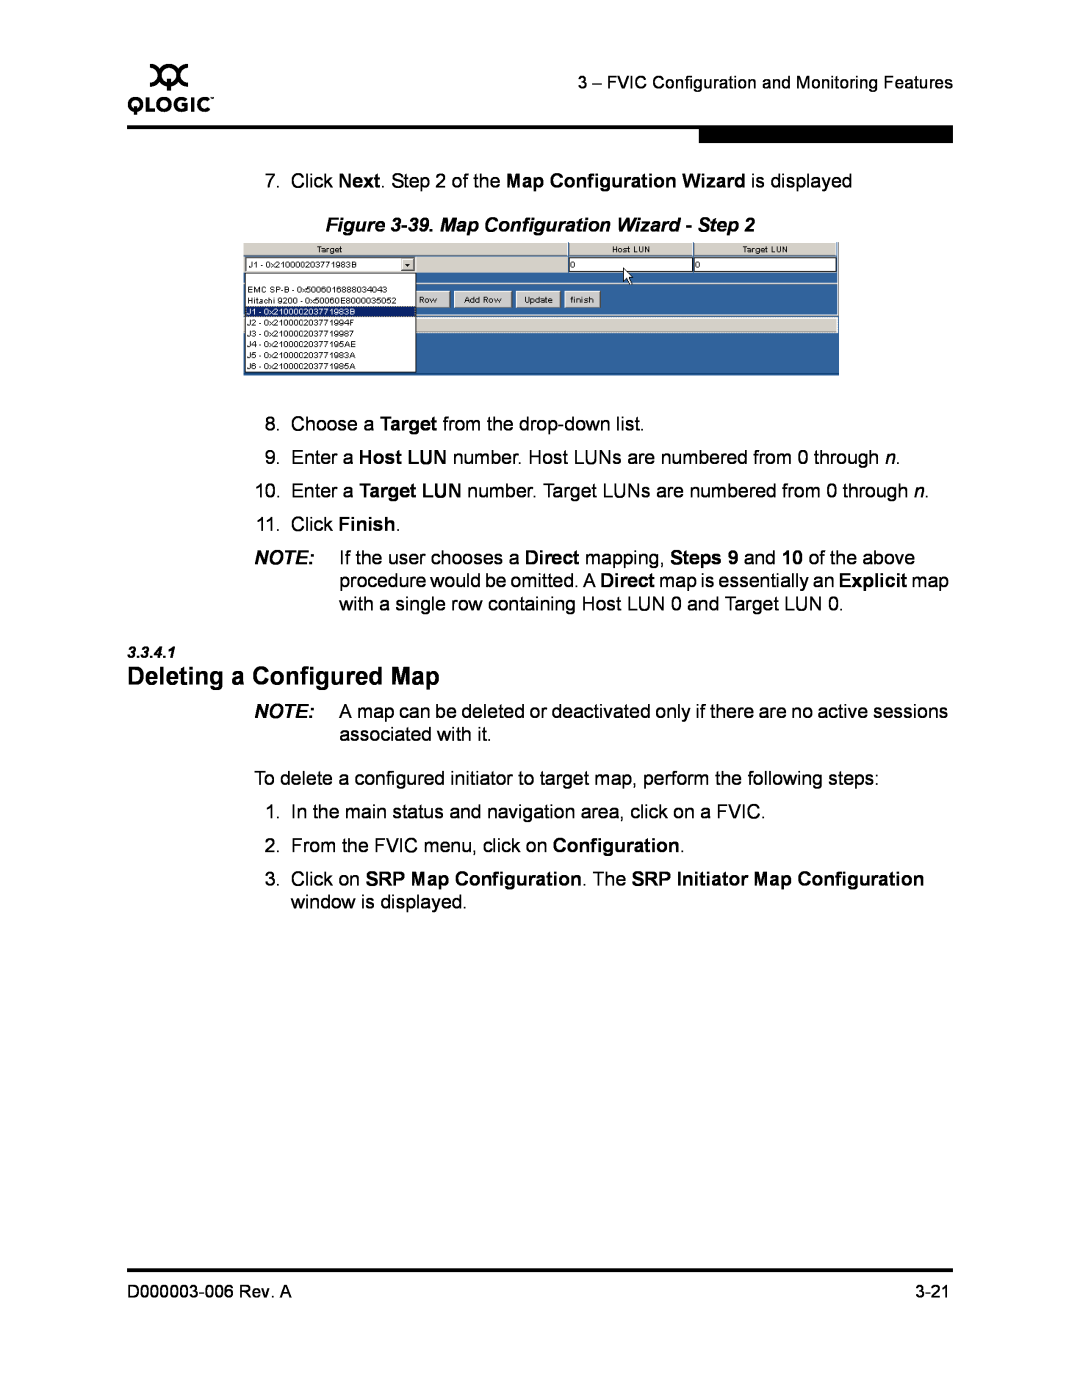 Q-Logic 9000 manual Deleting a Configured Map, 39. Map Configuration Wizard - Step 